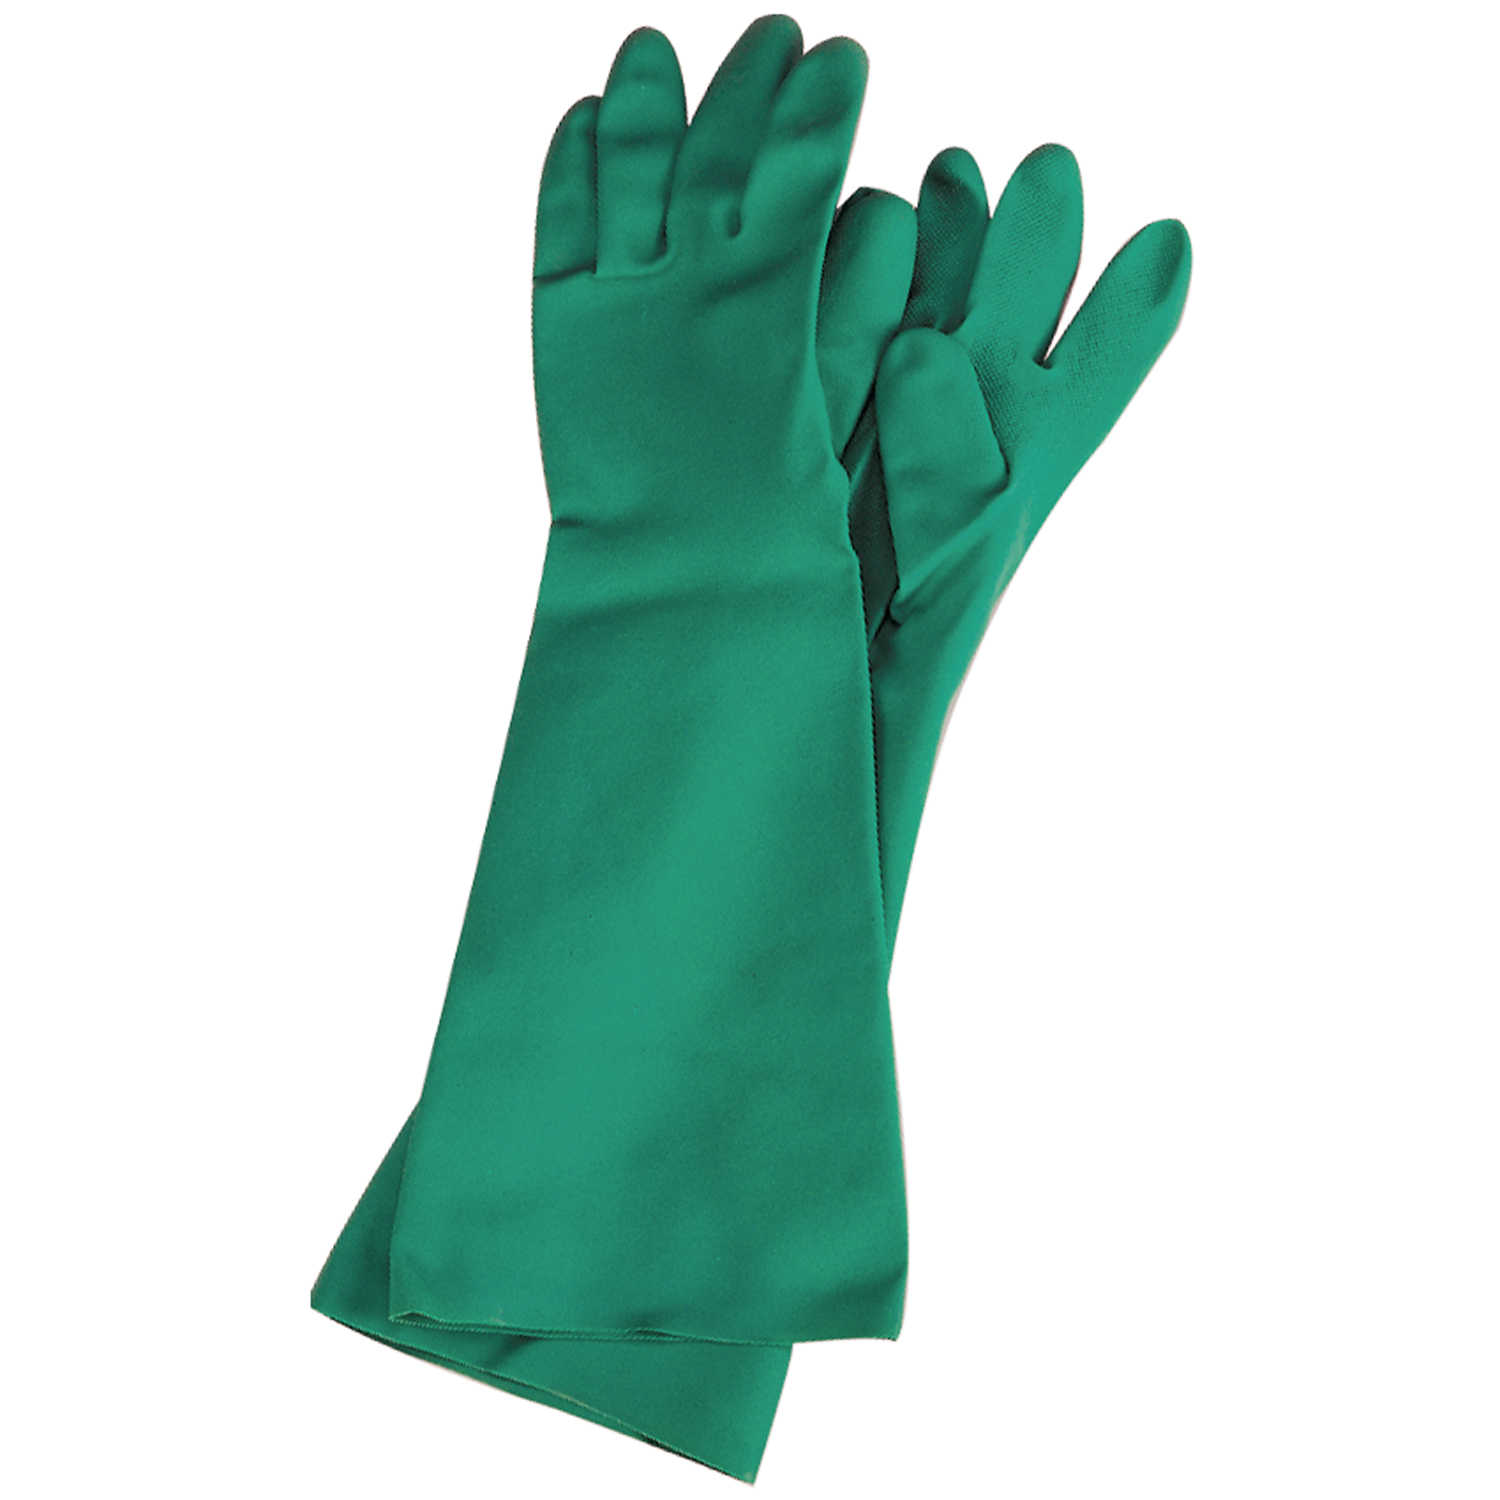 Nitrile gloves suppliers